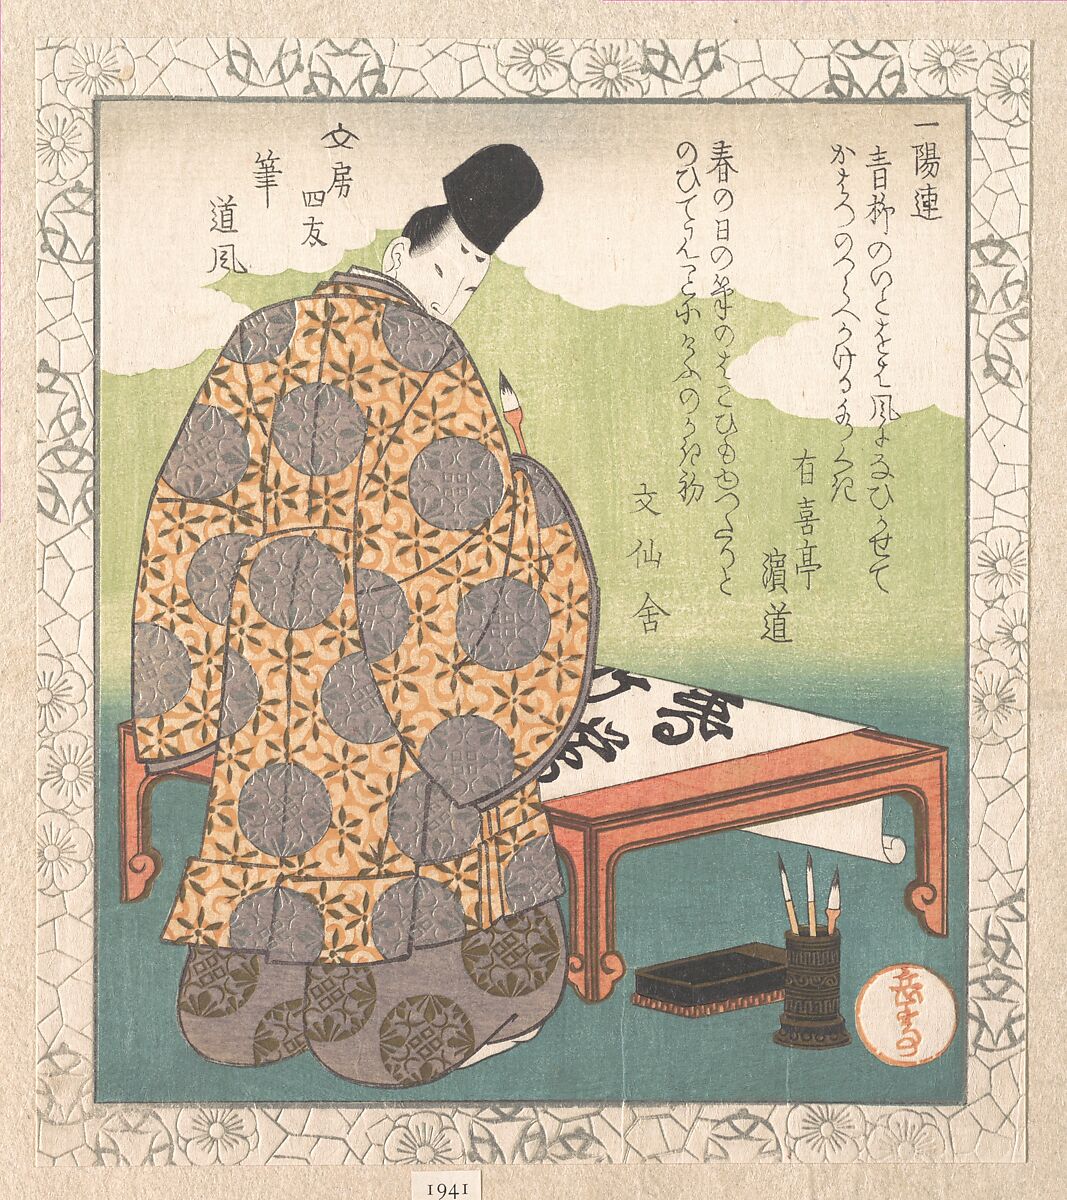 The Heian Court Calligrapher Ono no Tōfū (894–966); “Calligraphy Brush” (Fude), from Four Friends of the Writing Table for the Ichiyō Poetry Circle (Ichiyō-ren Bunbō shiyū)
From the Spring Rain Collection (Harusame shū), vol. 1, Yashima Gakutei (Japanese, 1786?–1868), Woodblock print (surimono); ink and color on paper, Japan 